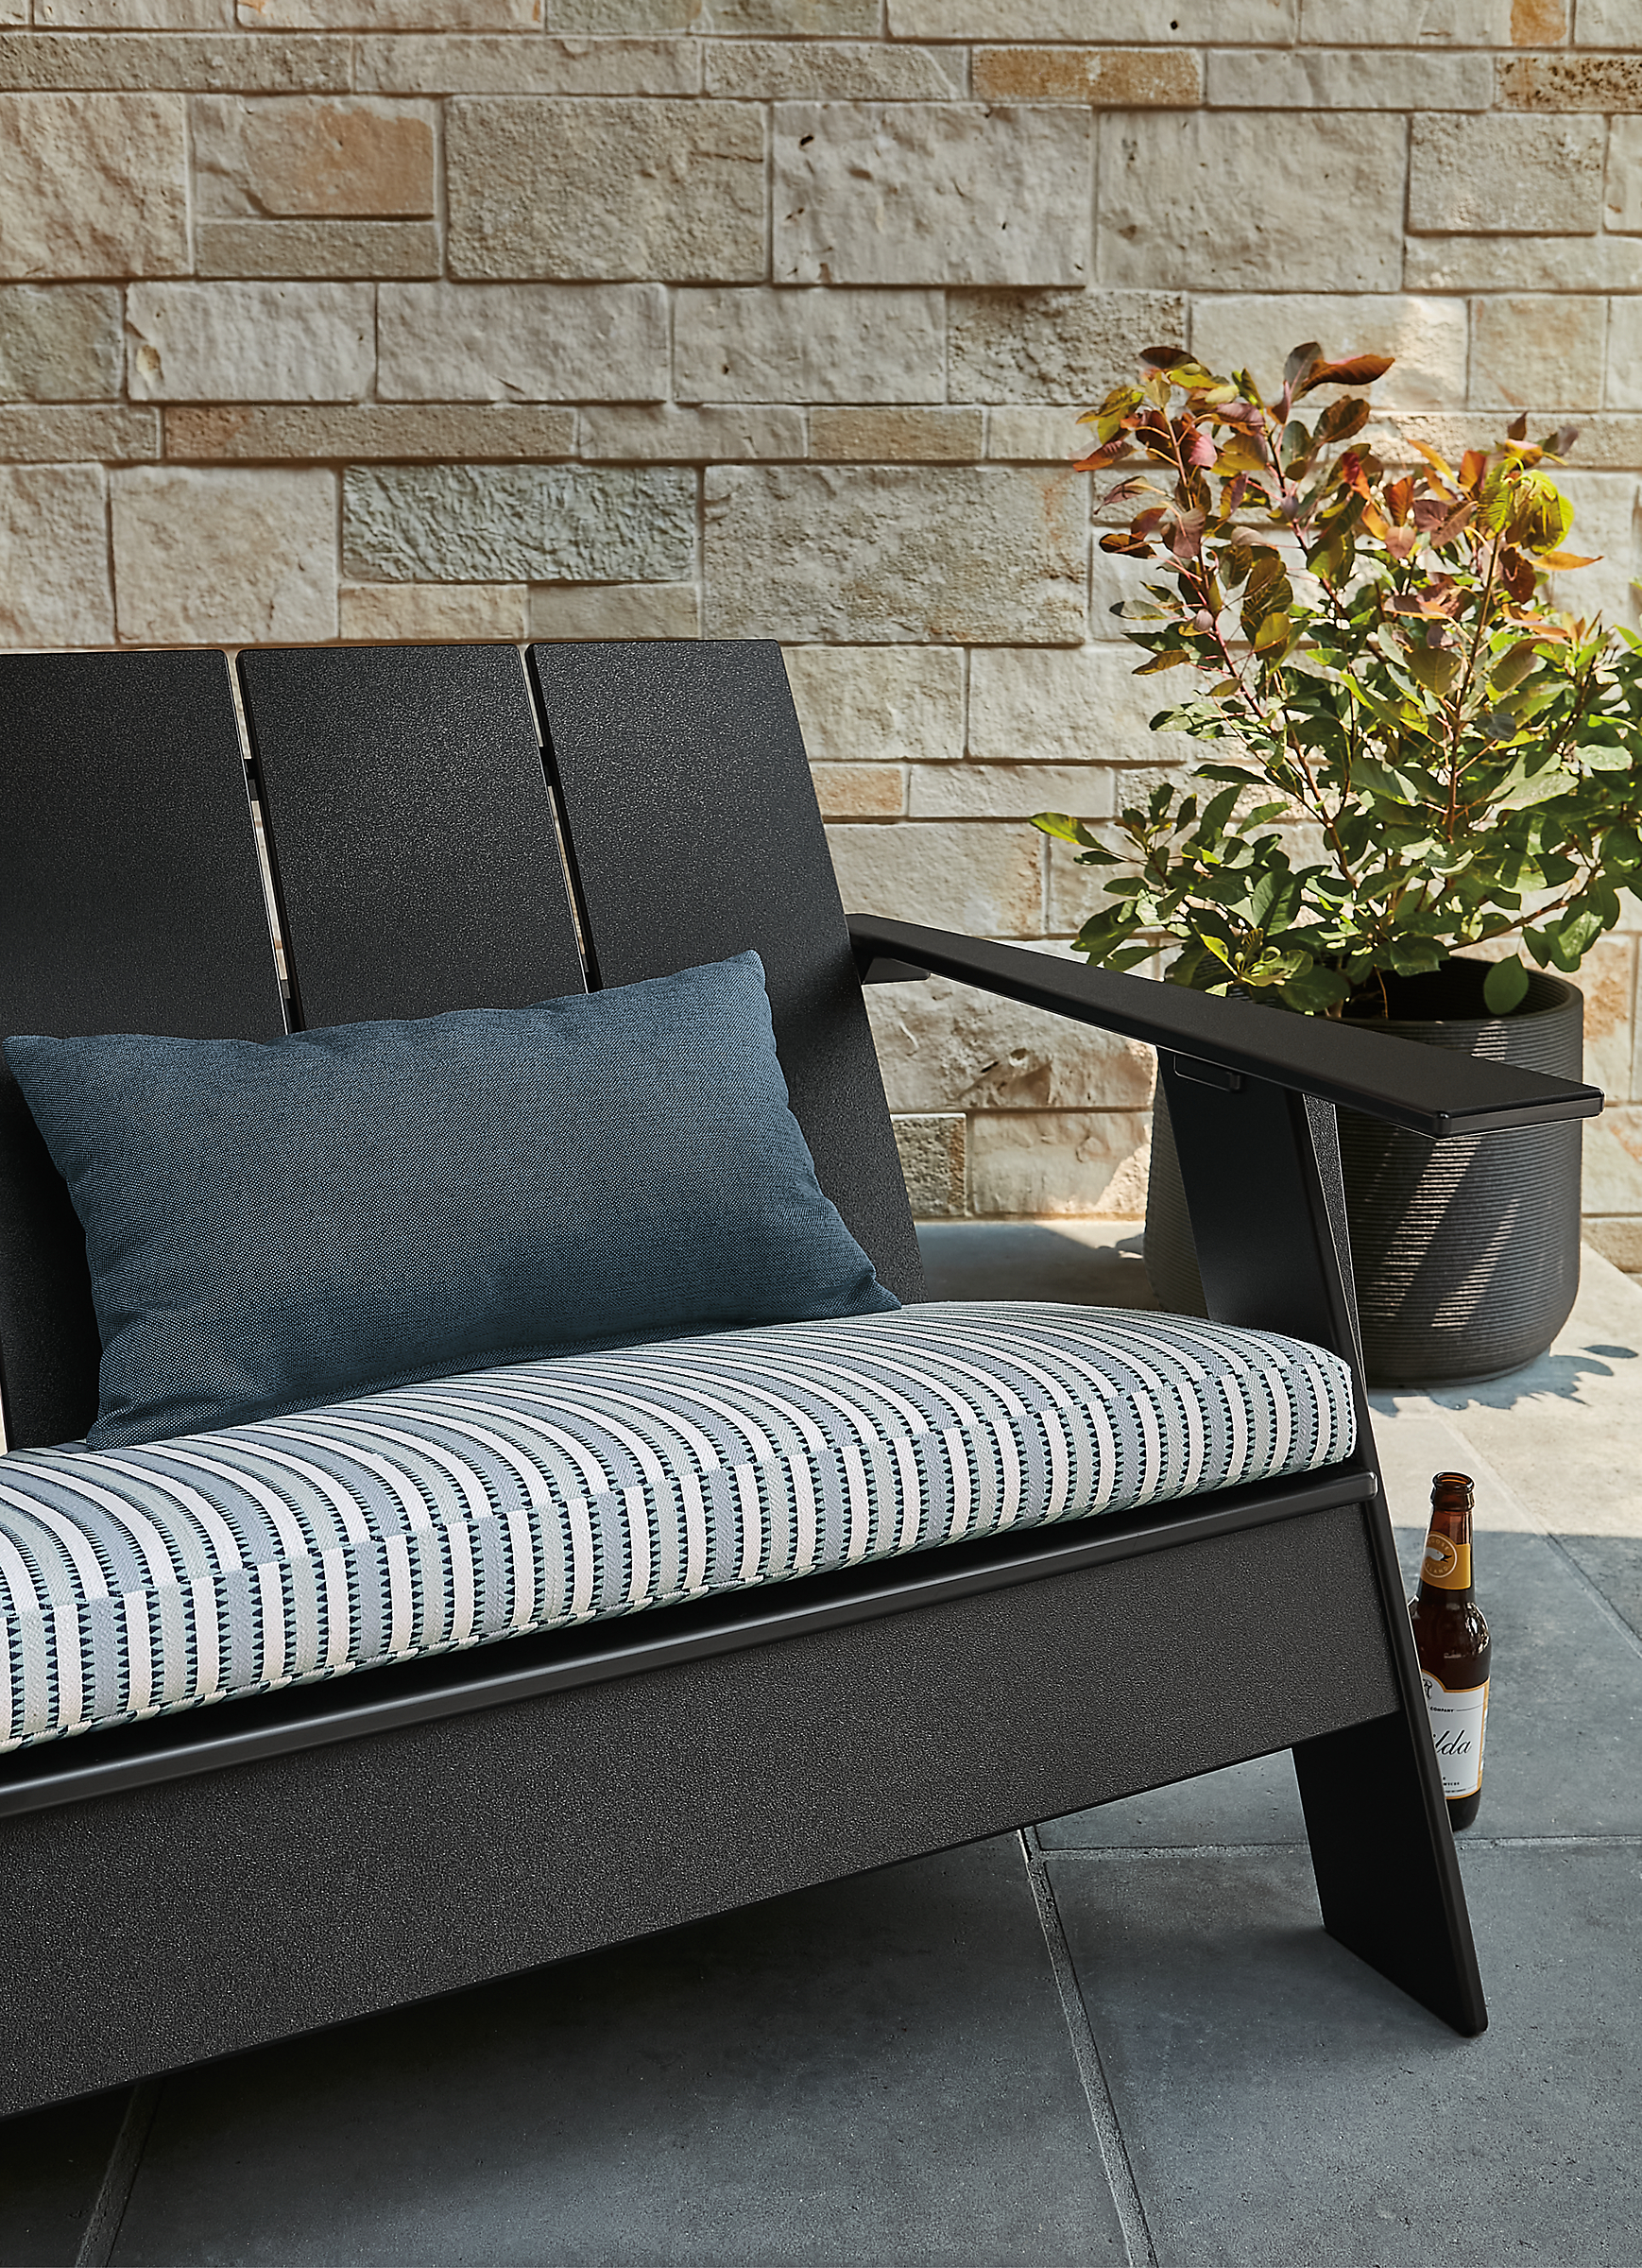 Outdoor space with emmet sofa with cushion, and ajax planter.